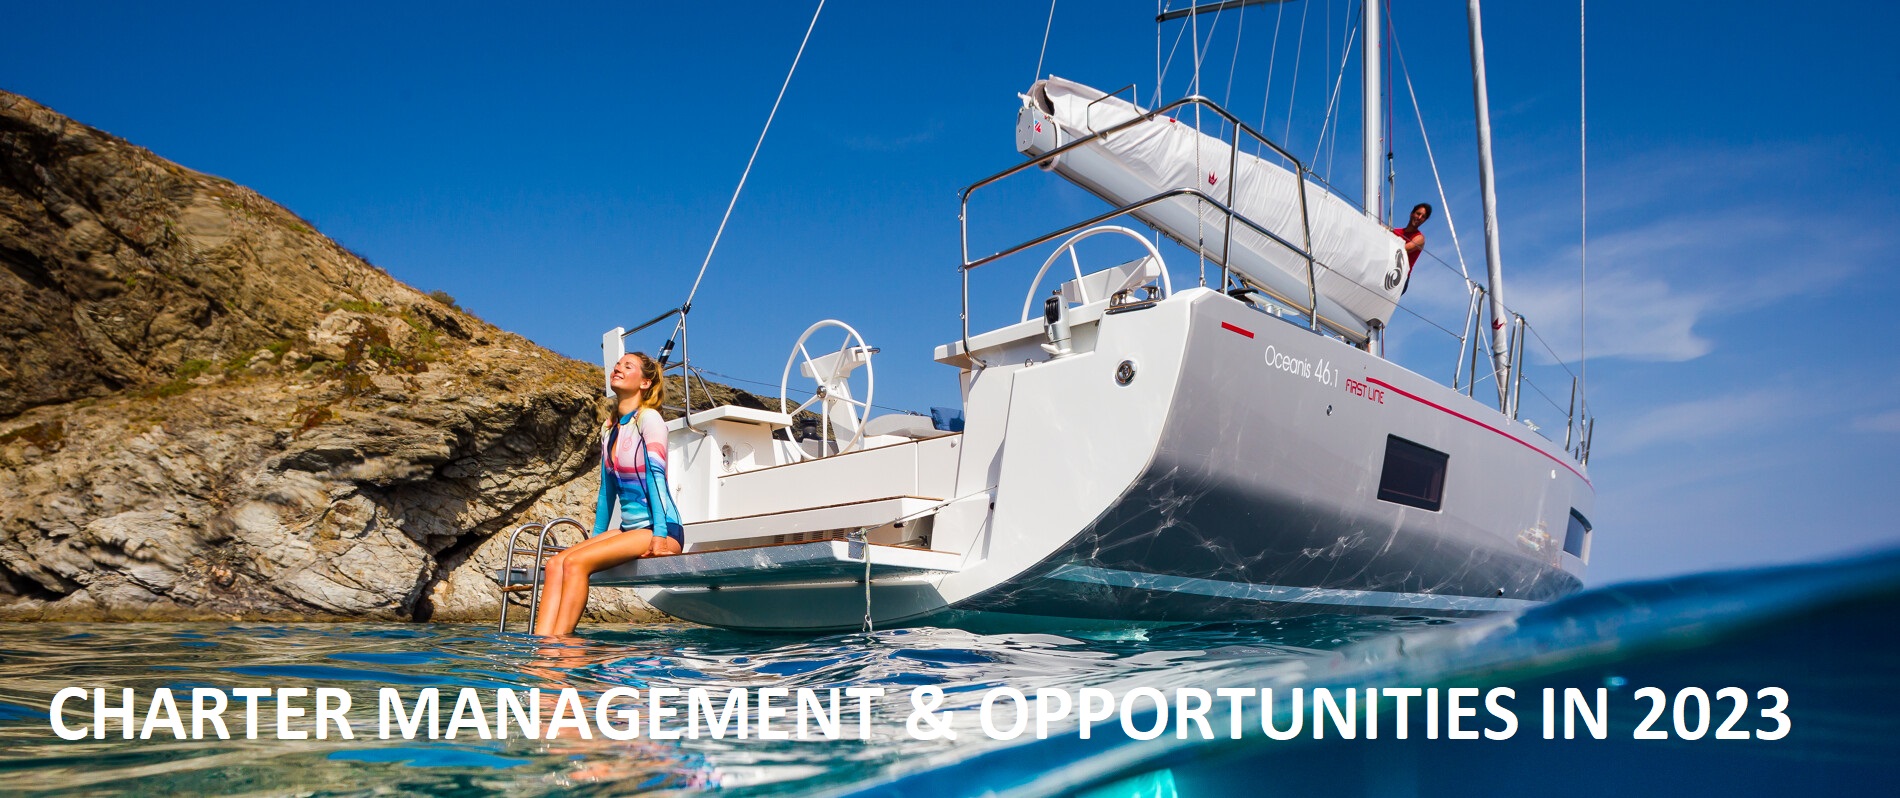 Charter Management & Opportunities in 2023